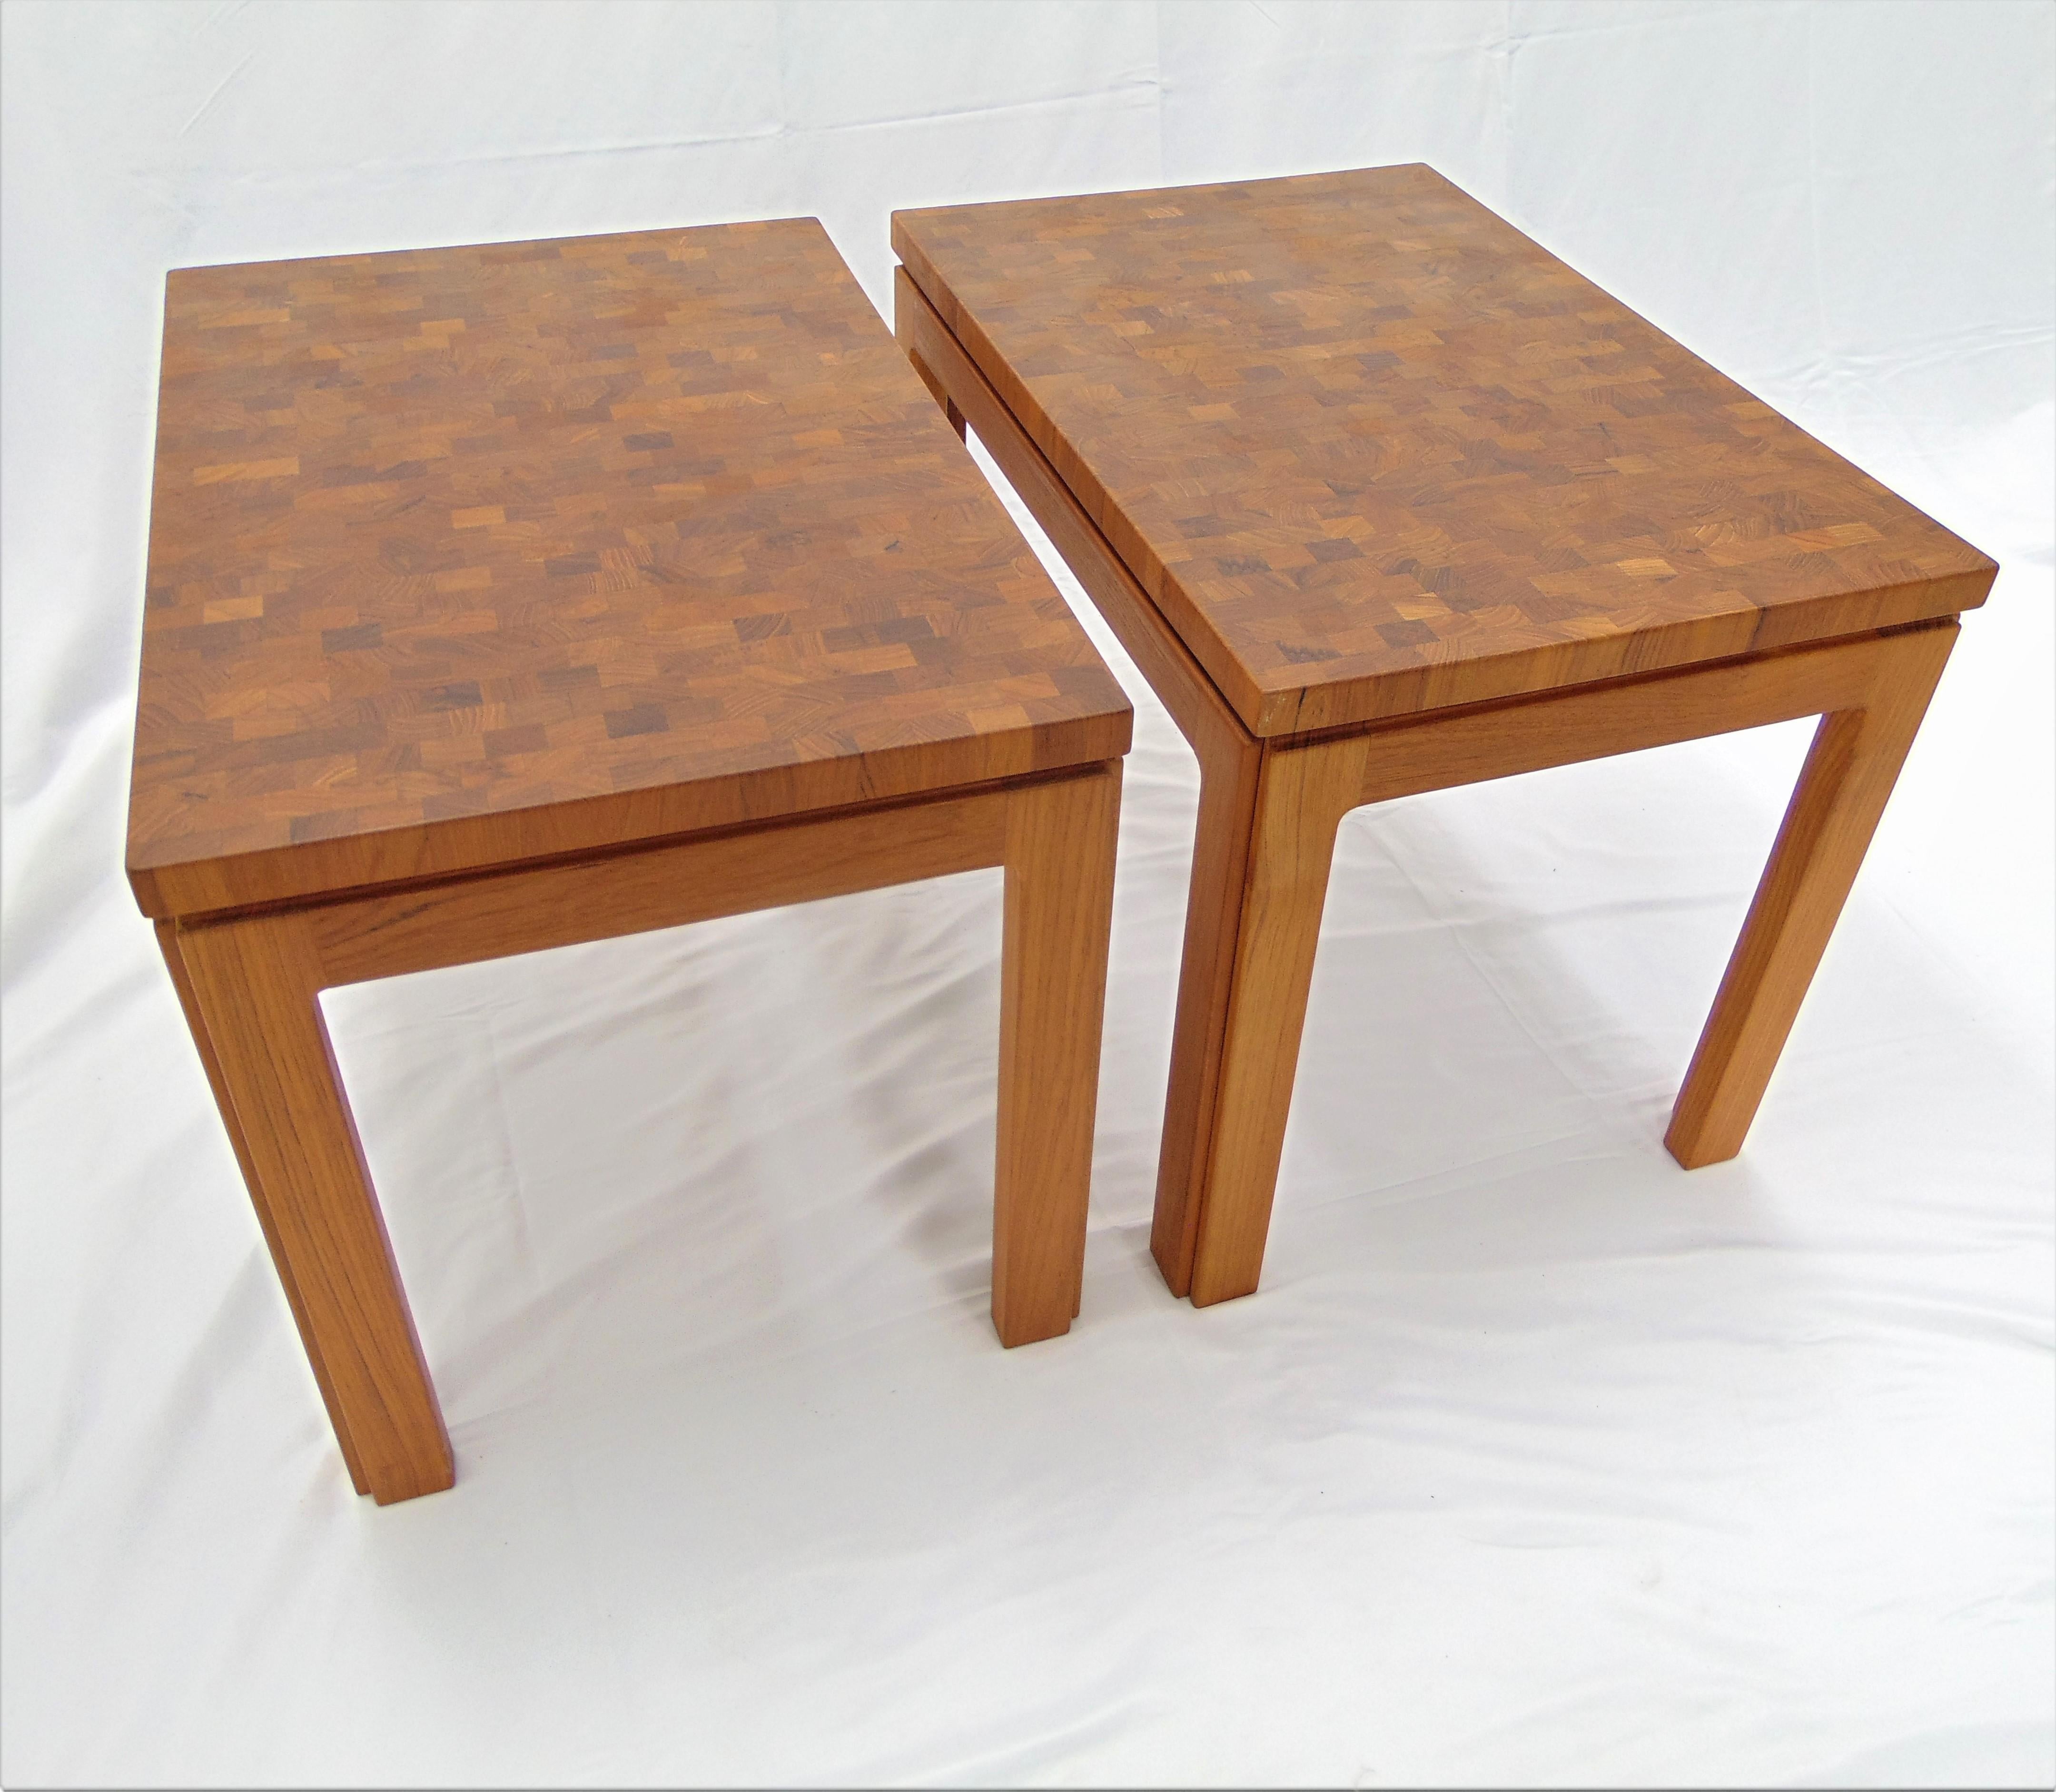 Tarm Stole Denmark Mid Century Teak Parquetry Wood Pair of Side Table In Good Condition For Sale In Tulsa, OK